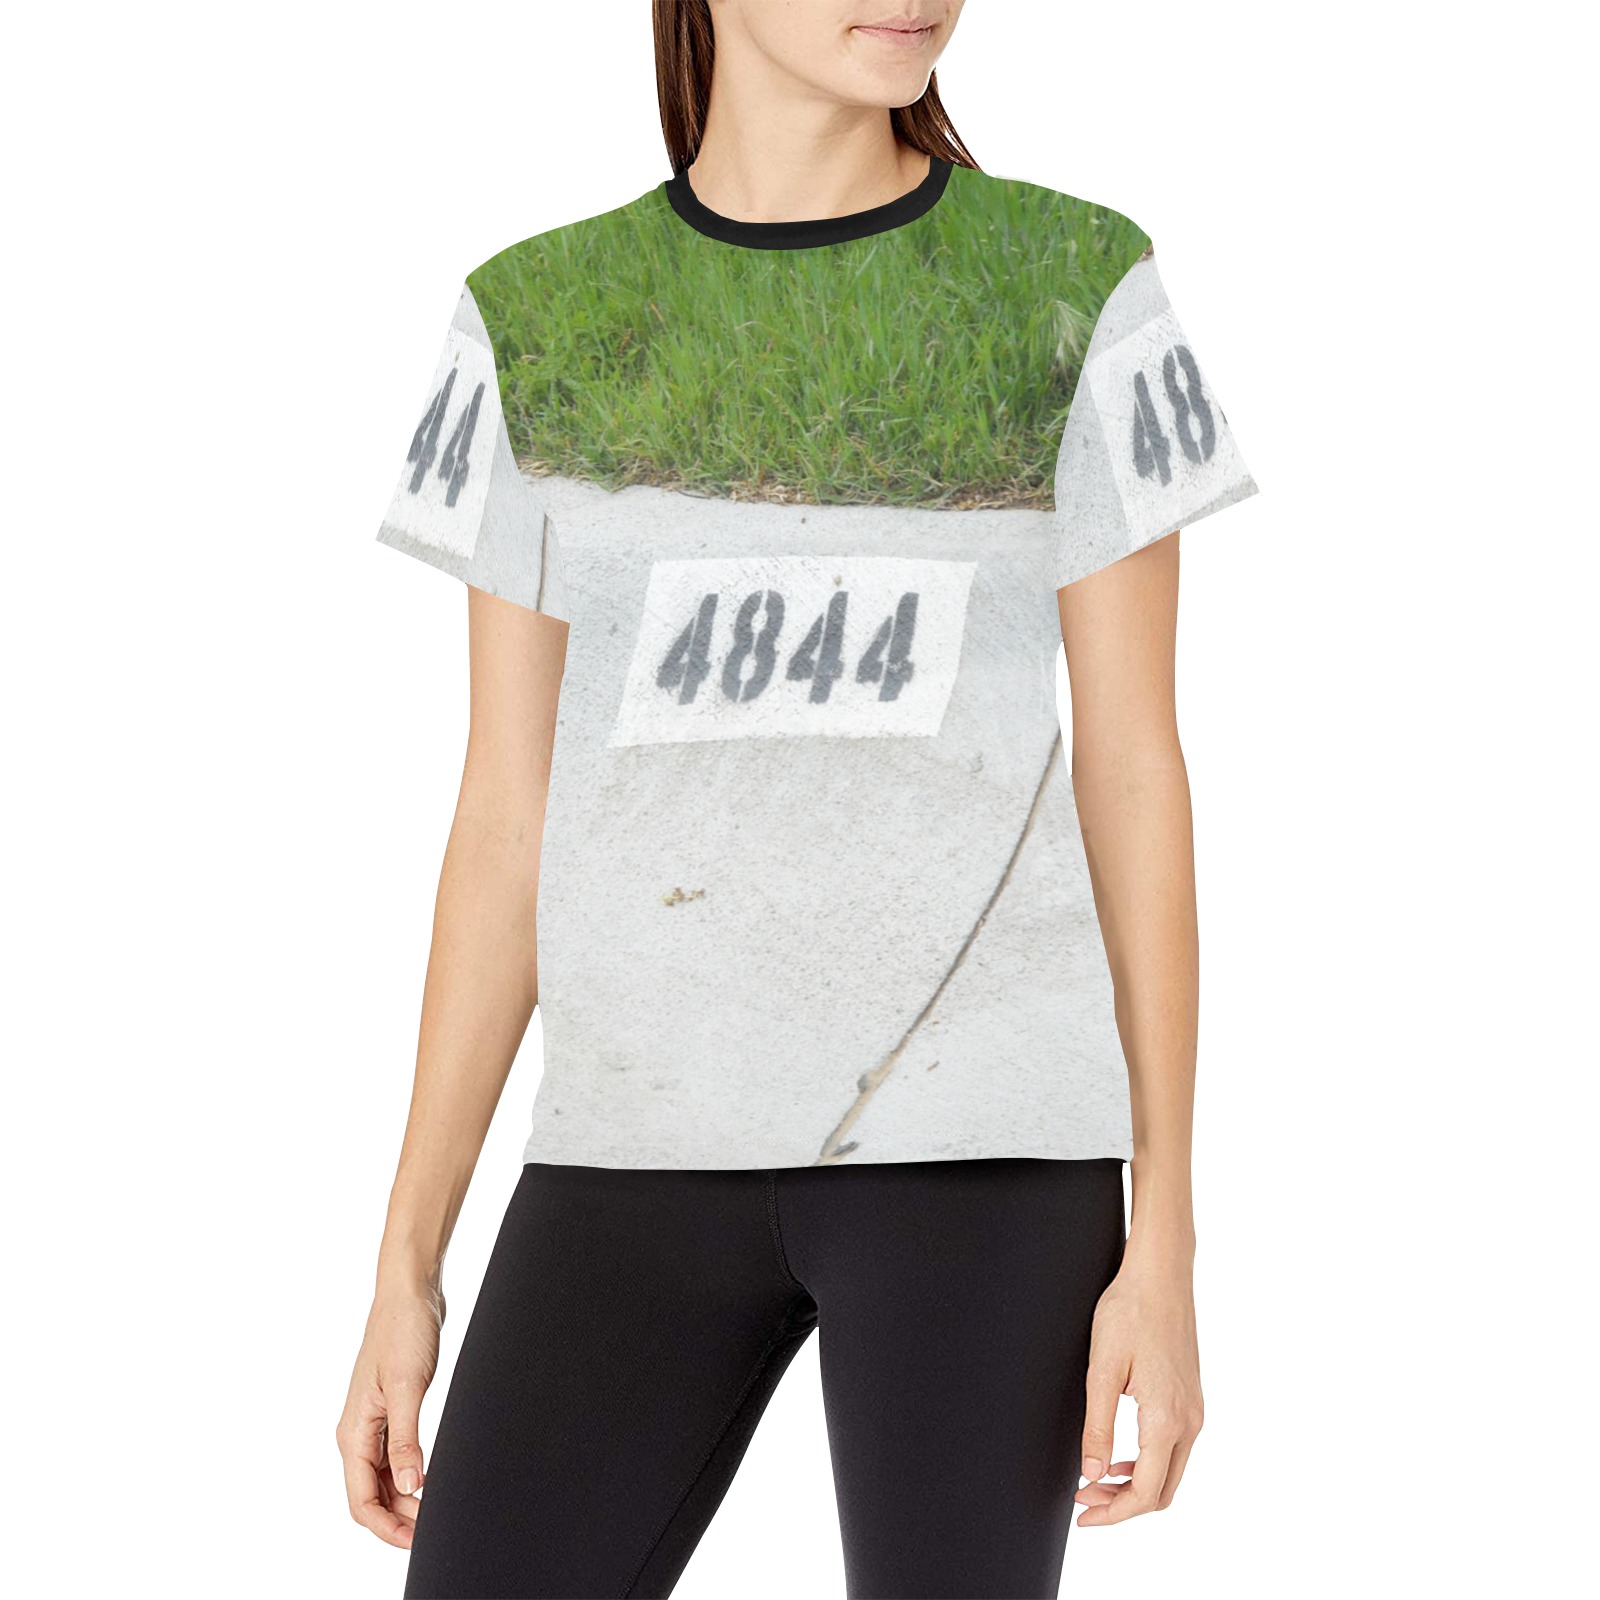 Street Number 4844 with black collar Women's All Over Print Crew Neck T-Shirt (Model T40-2)